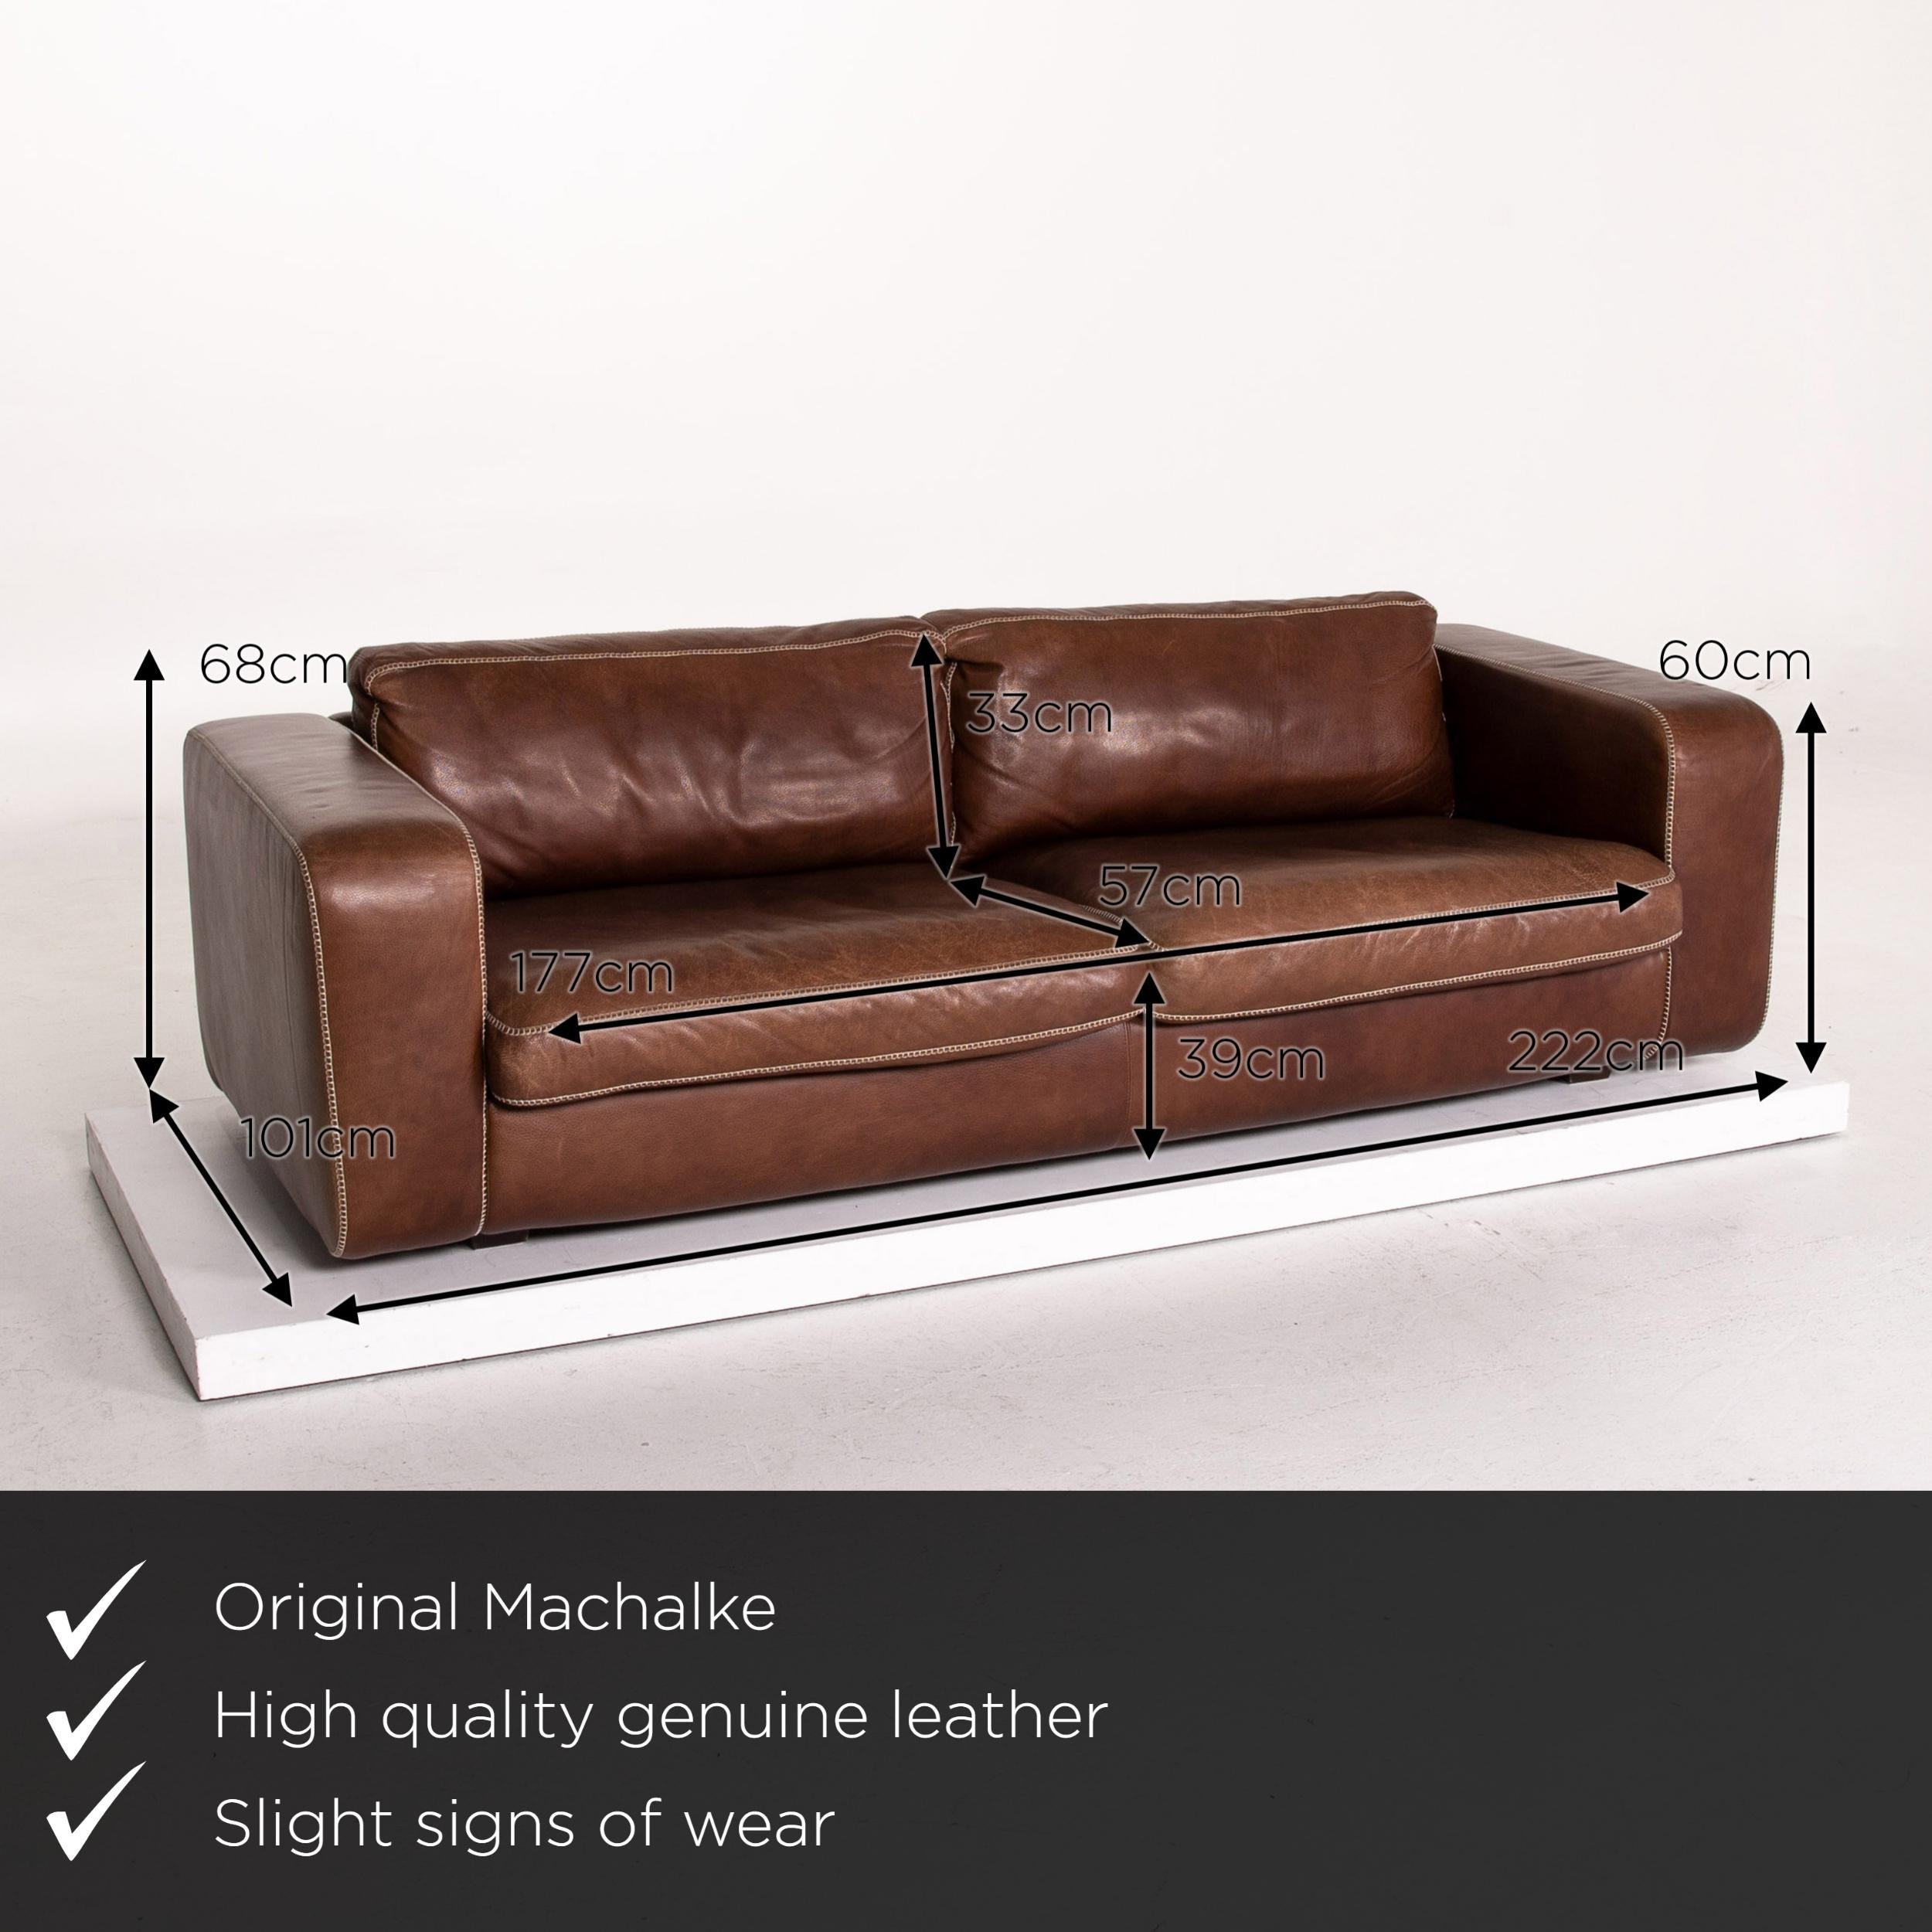 We present to you a Machalke Valentino leather sofa brown three-seat couch.
 
 

 Product measurements in centimeters:
 

Depth 101
Width 222
Height 68
Seat height 39
Rest height 60
Seat depth 57
Seat width 177
Back height 33.